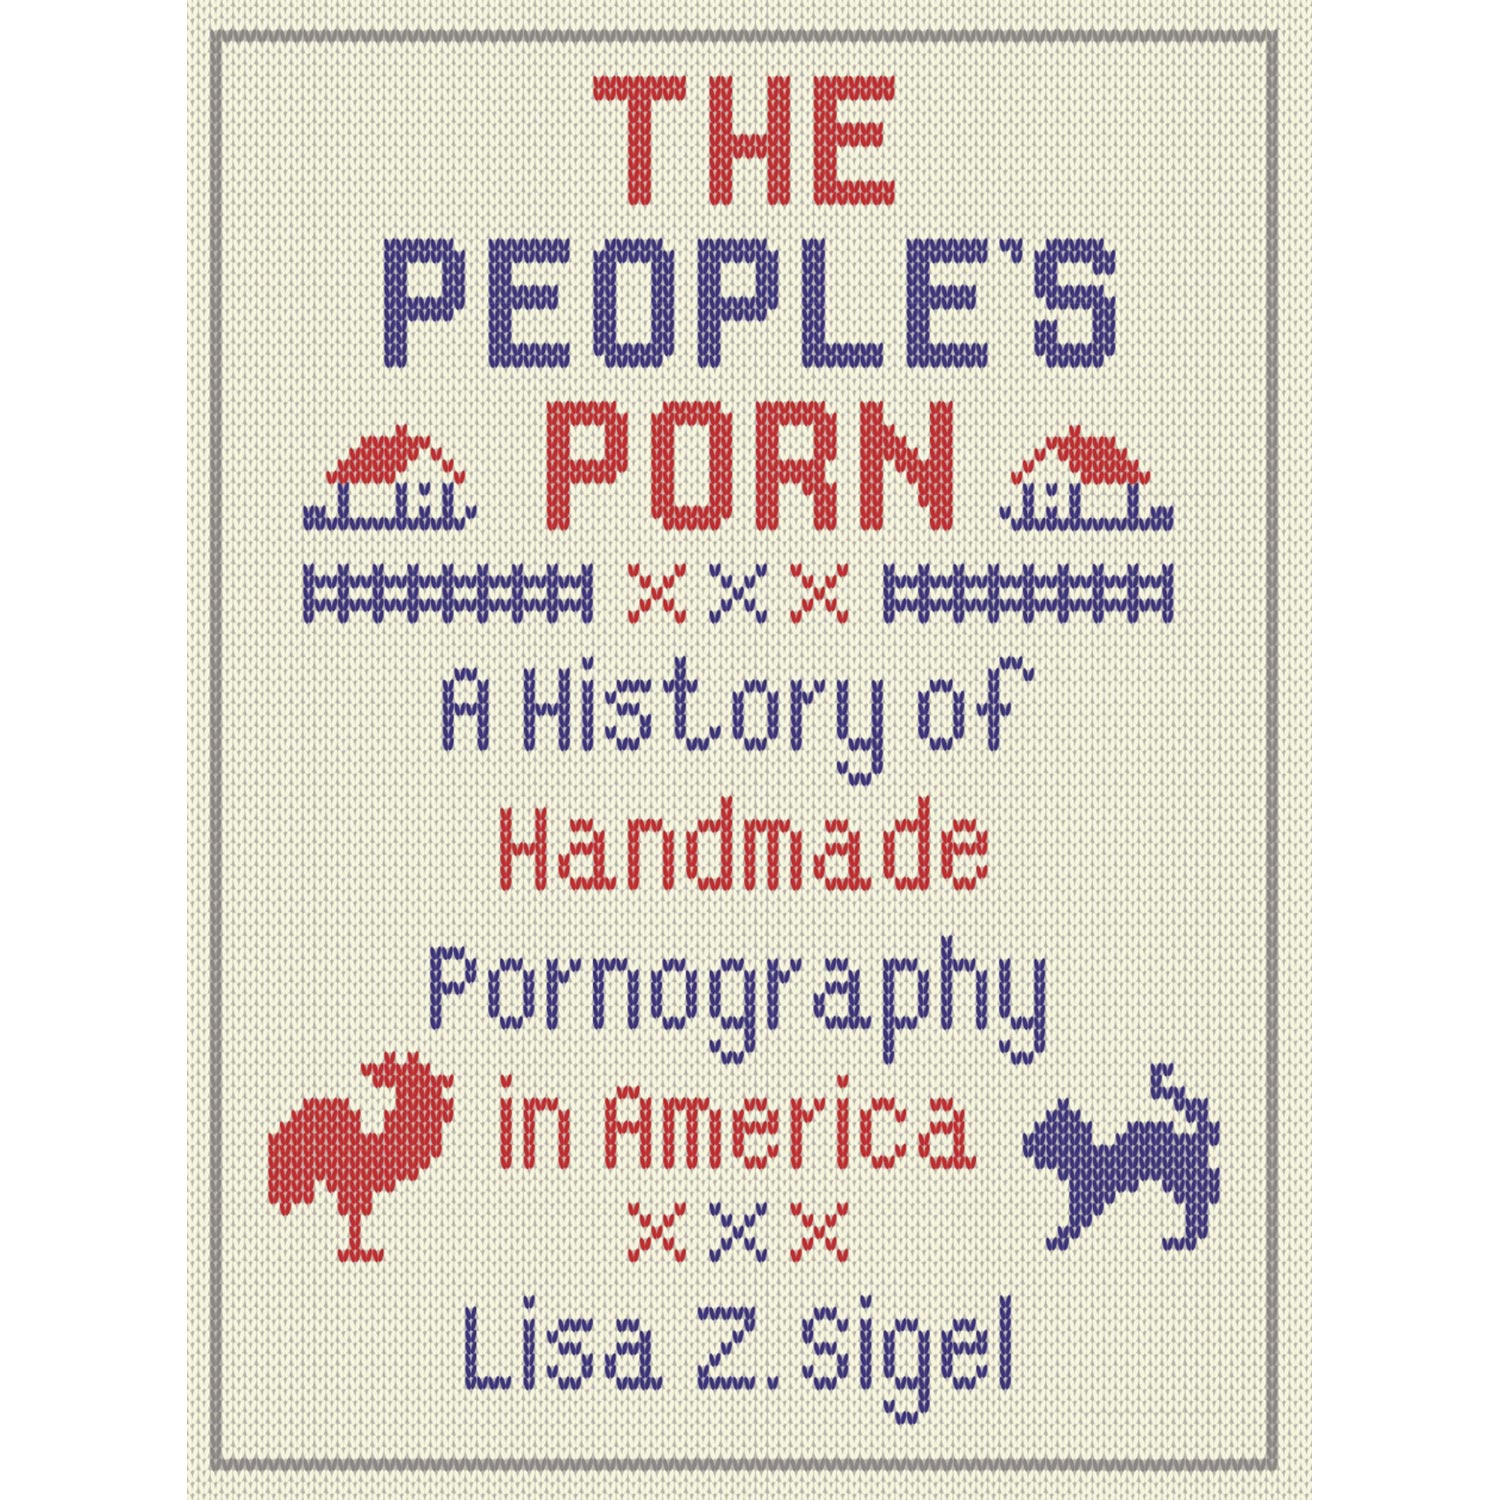 The cover of The People’s Porn.